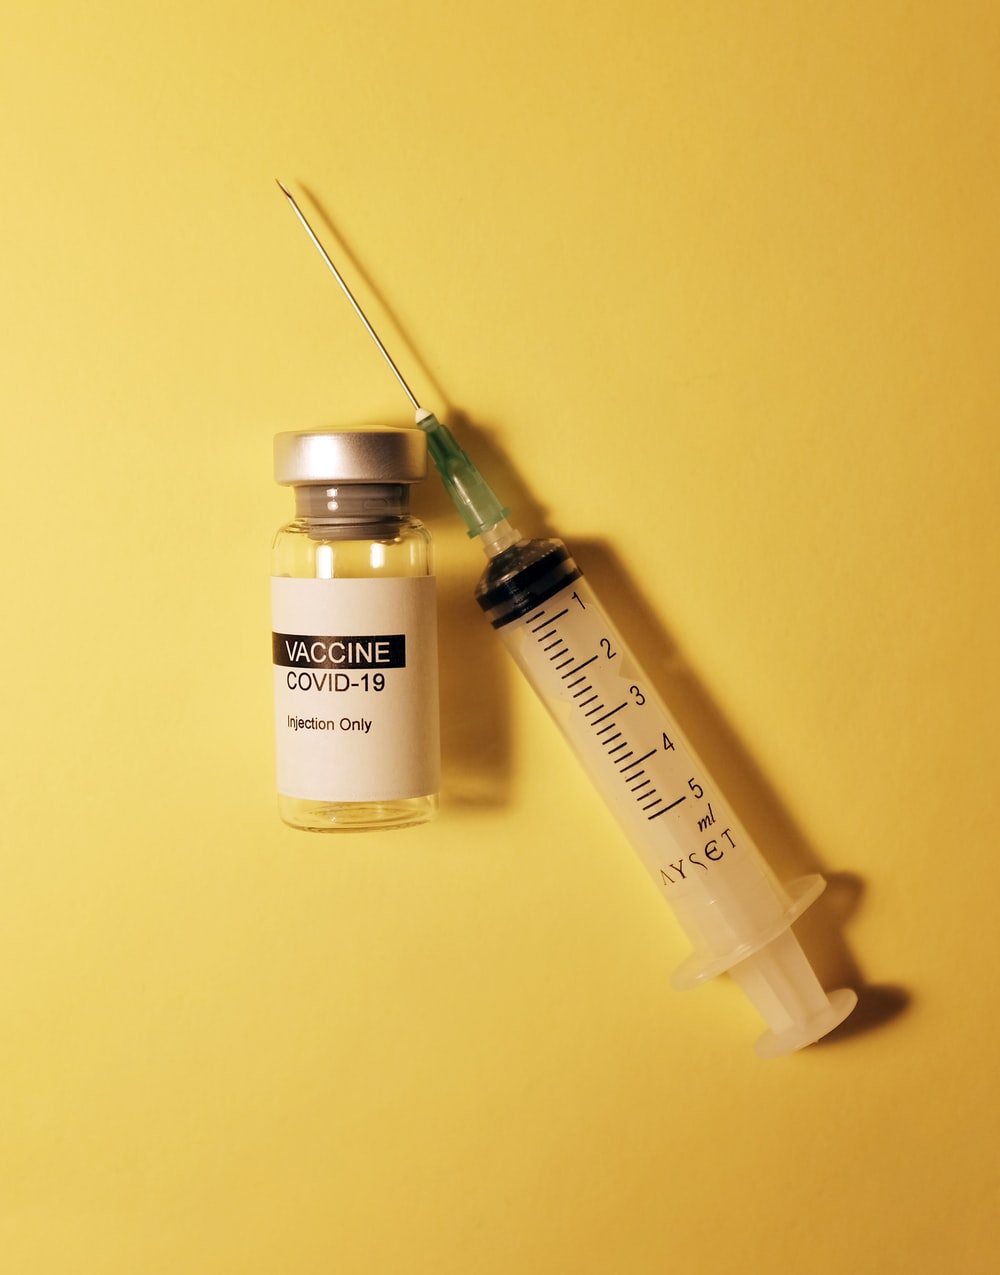 a COVID-19 vaccine bottle and a syringe